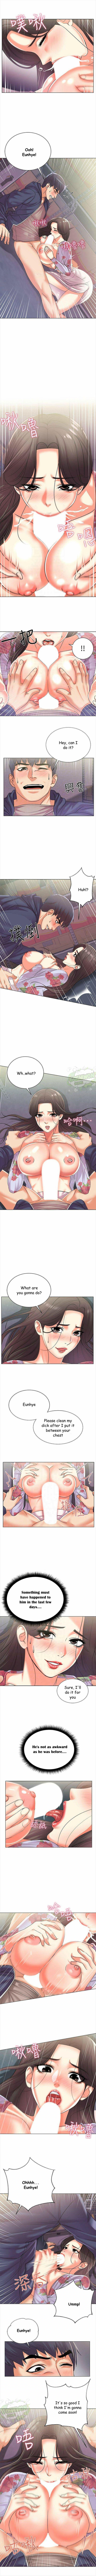 Eunhye’s Supermarket - Chapter 16 Page 4